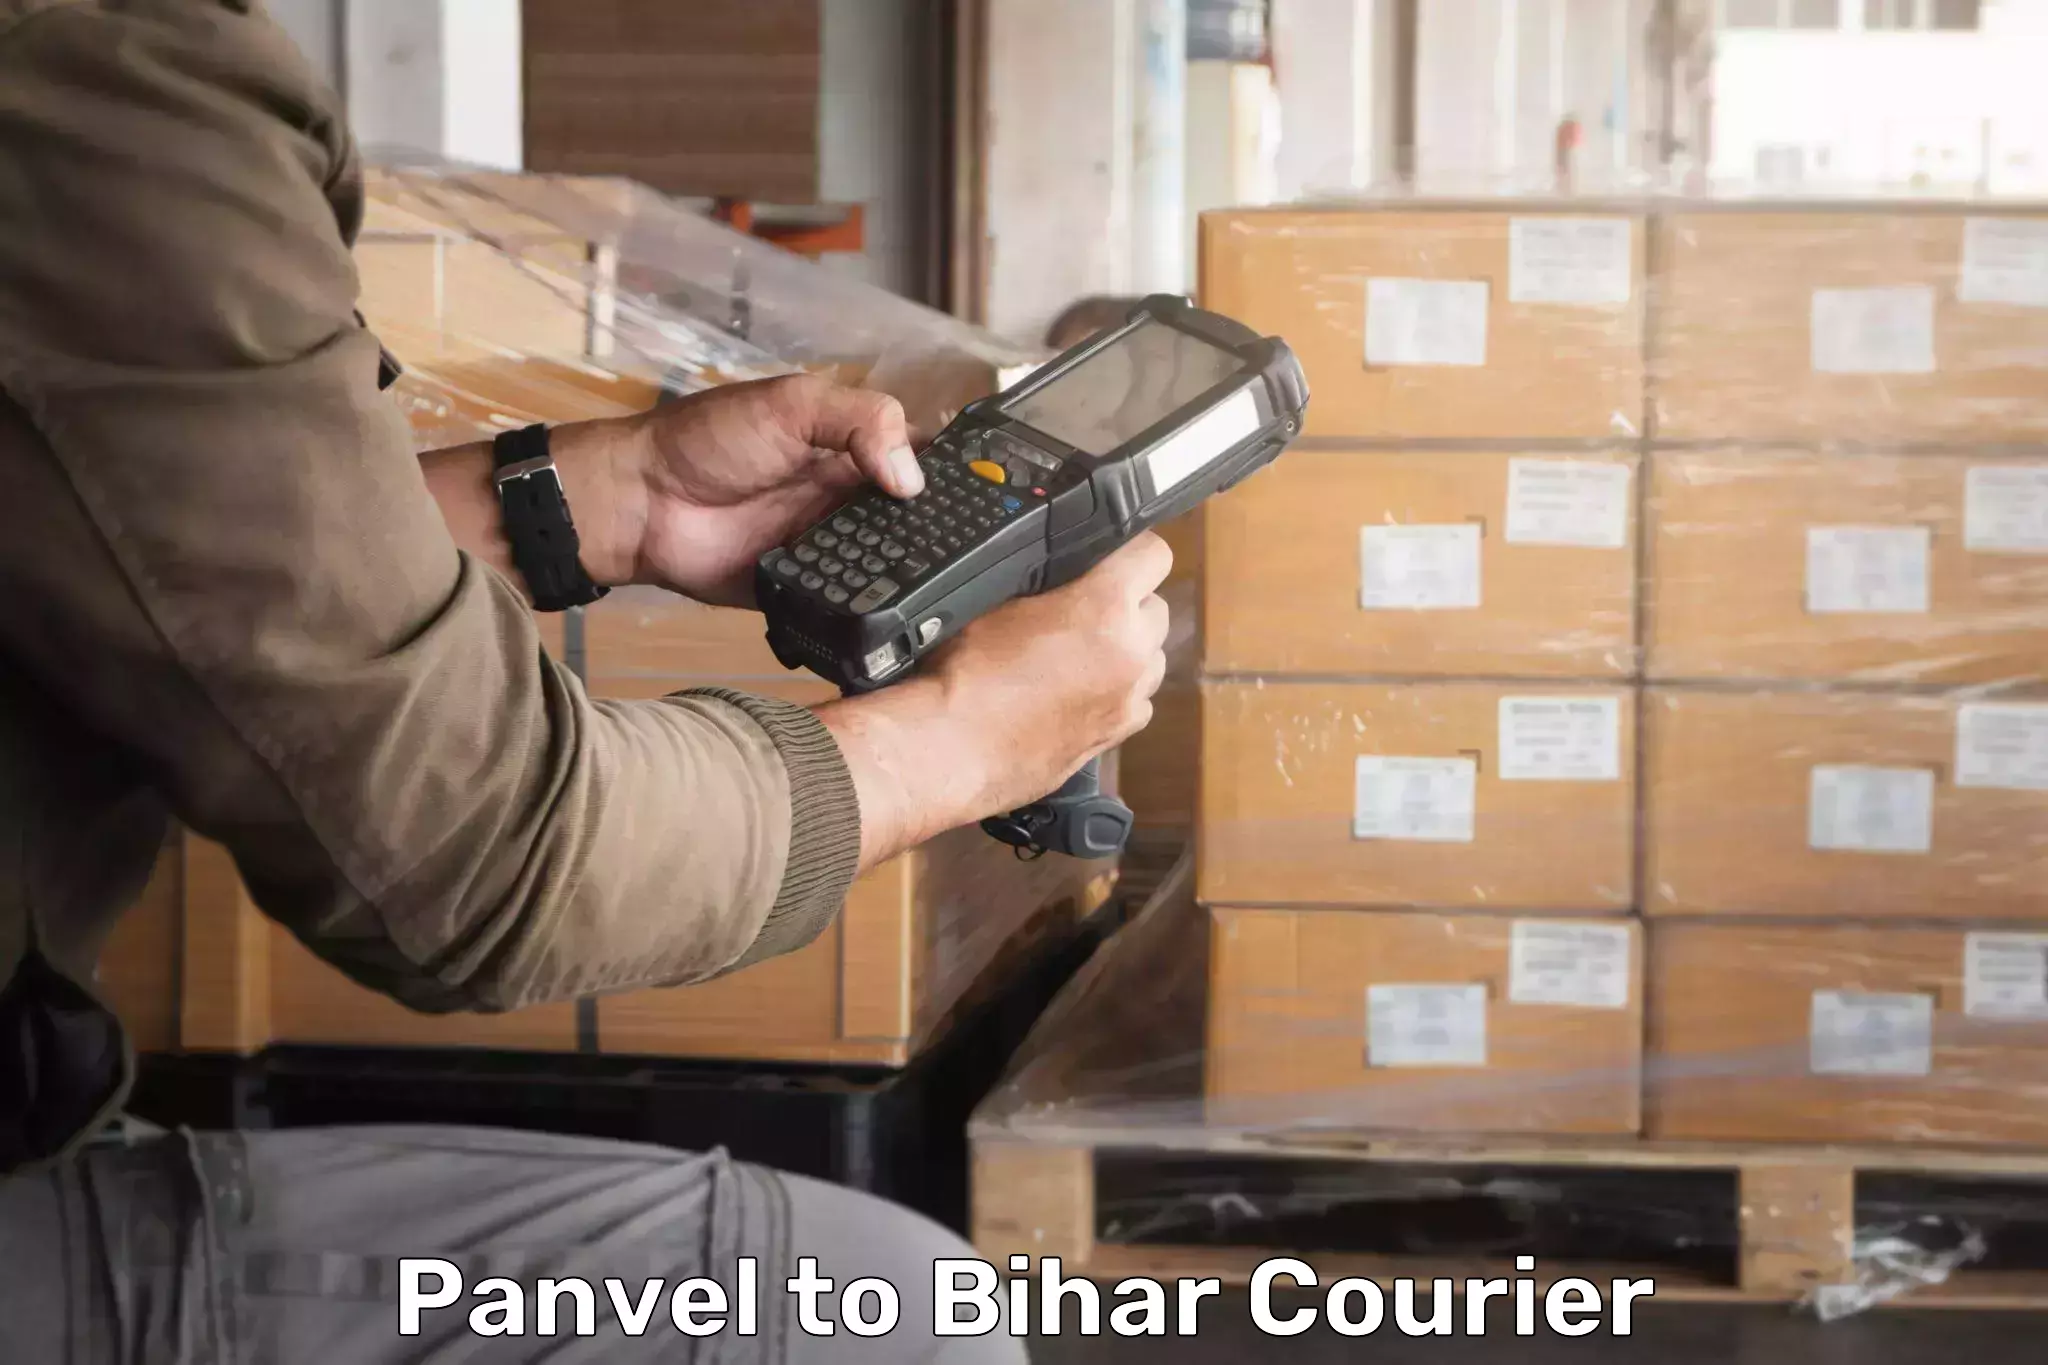 Professional courier handling Panvel to Bhorey